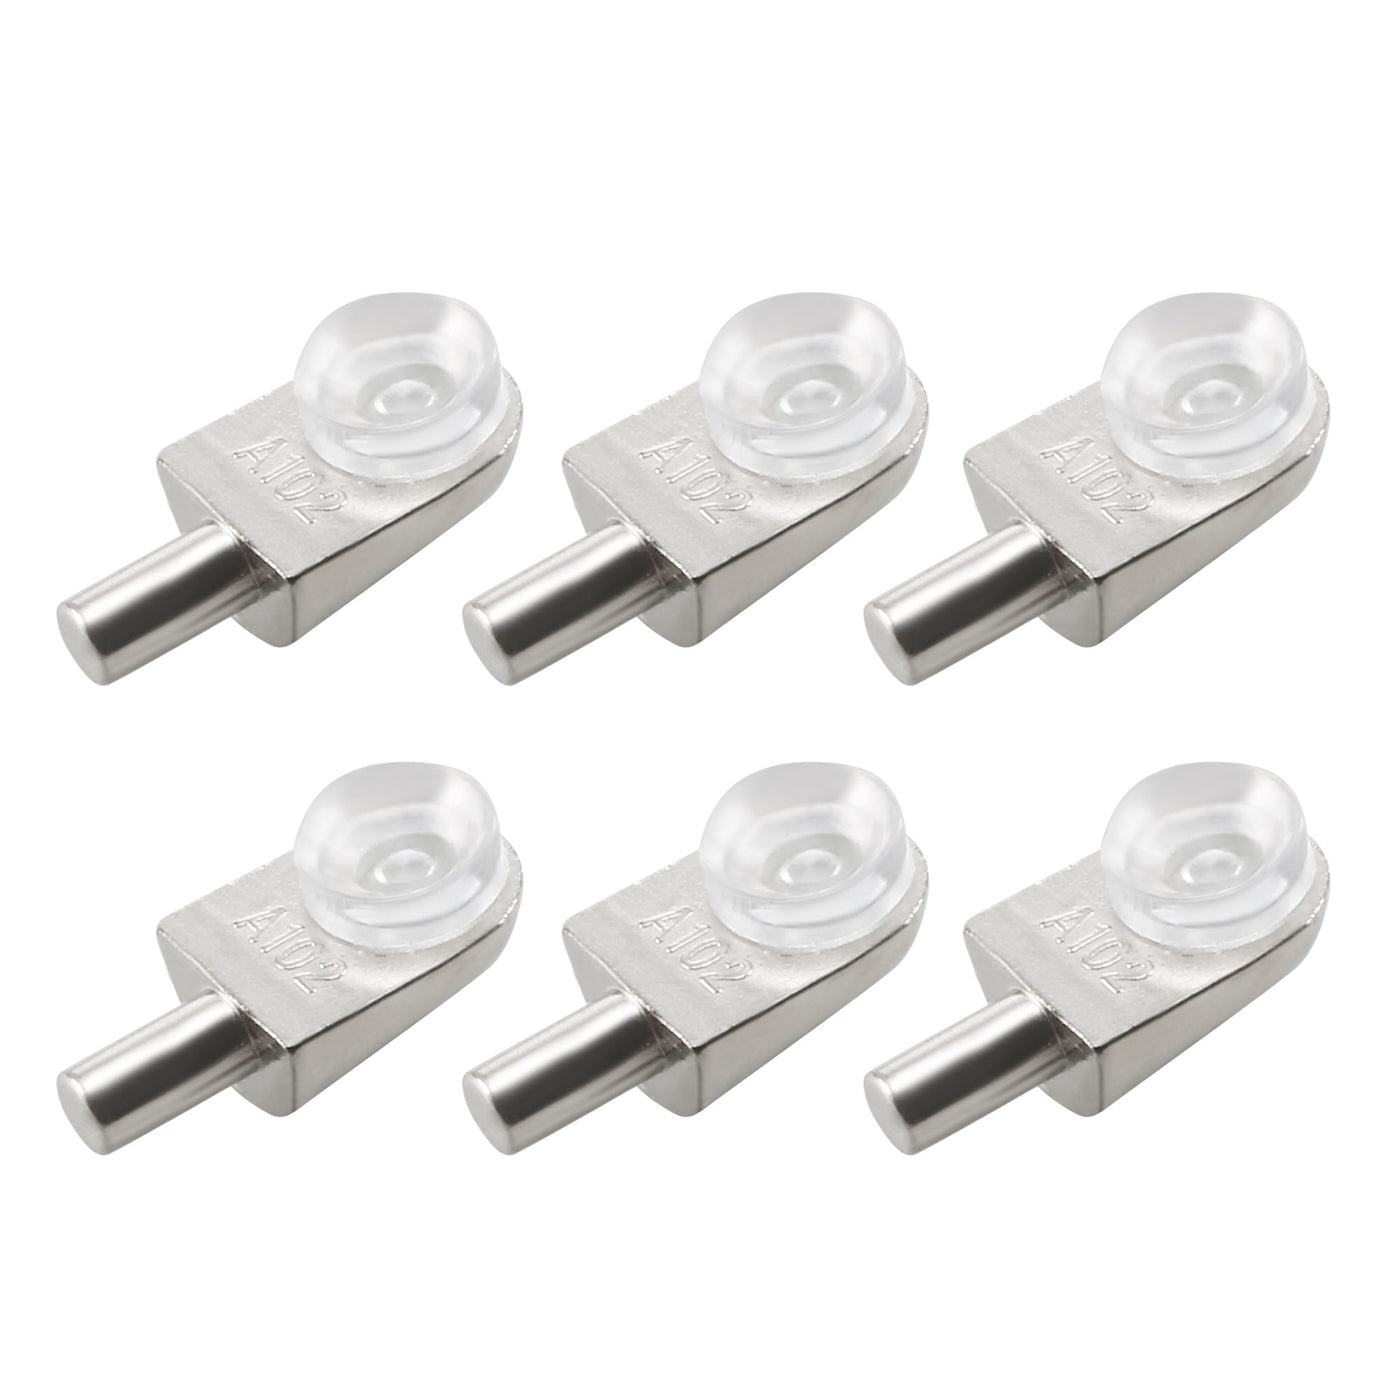 uxcell Uxcell Shelf Support Pegs Glass Clamp Bracket Zinc Alloy Nail with Suction Cup , 10pcs